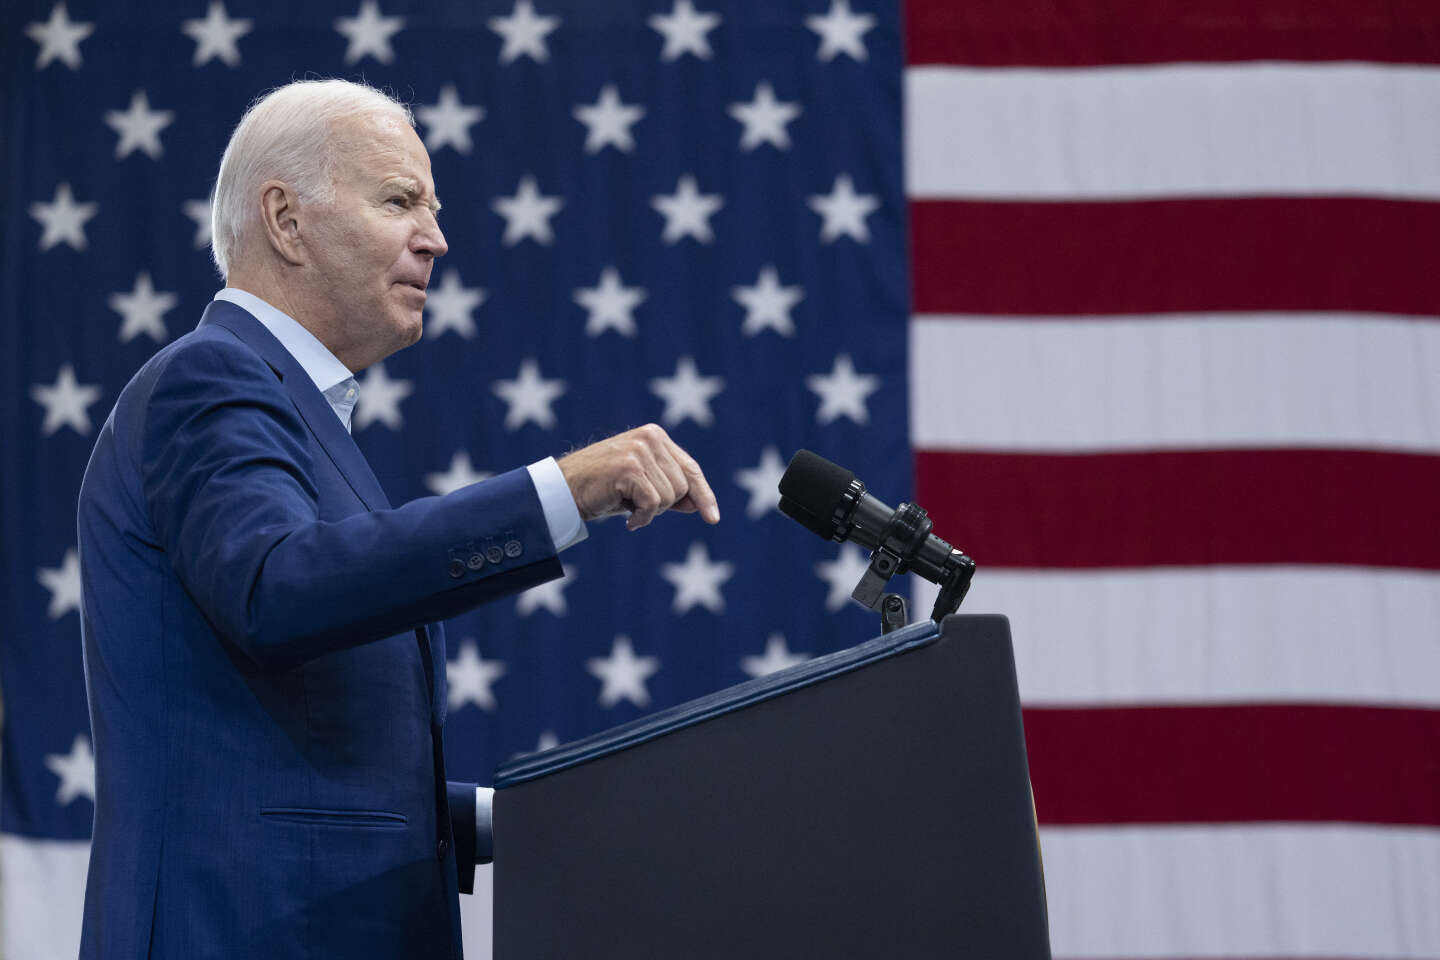 Joe Biden emphasizes confrontation with China in technology